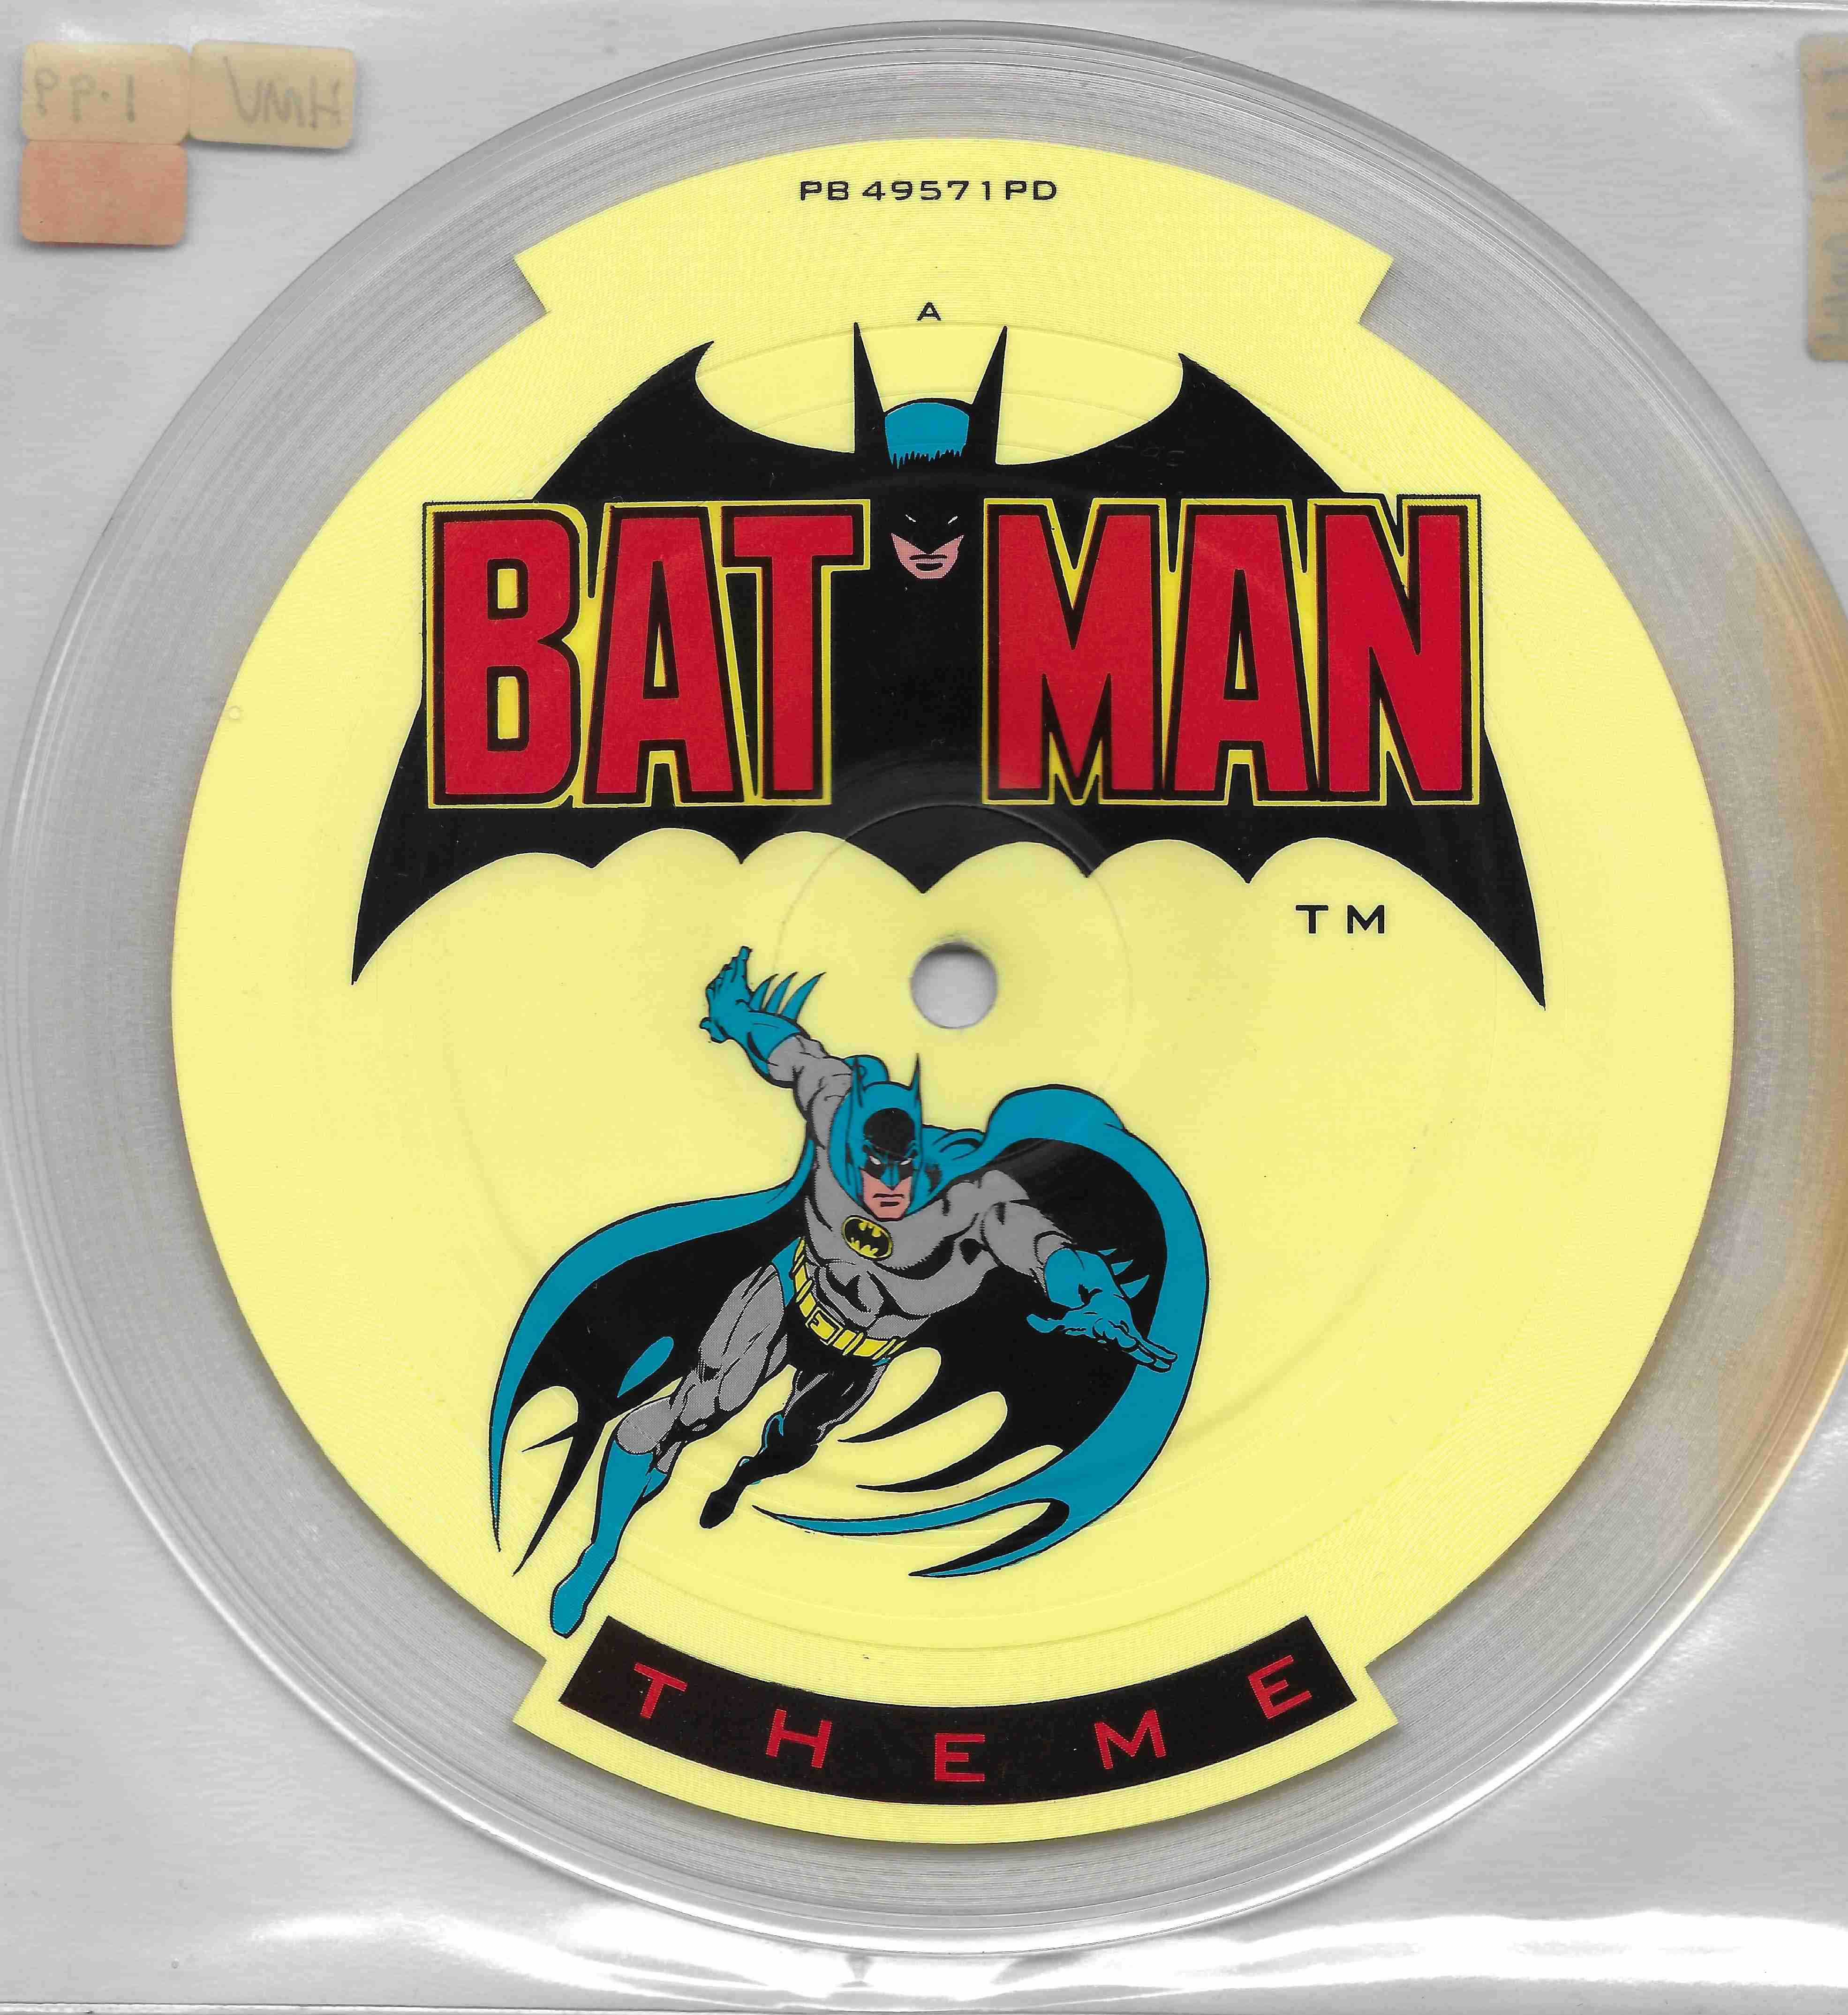 Picture of PB 49571 PD Batman - Picture disc by artist Neal Hefti from the BBC singles - Records and Tapes library